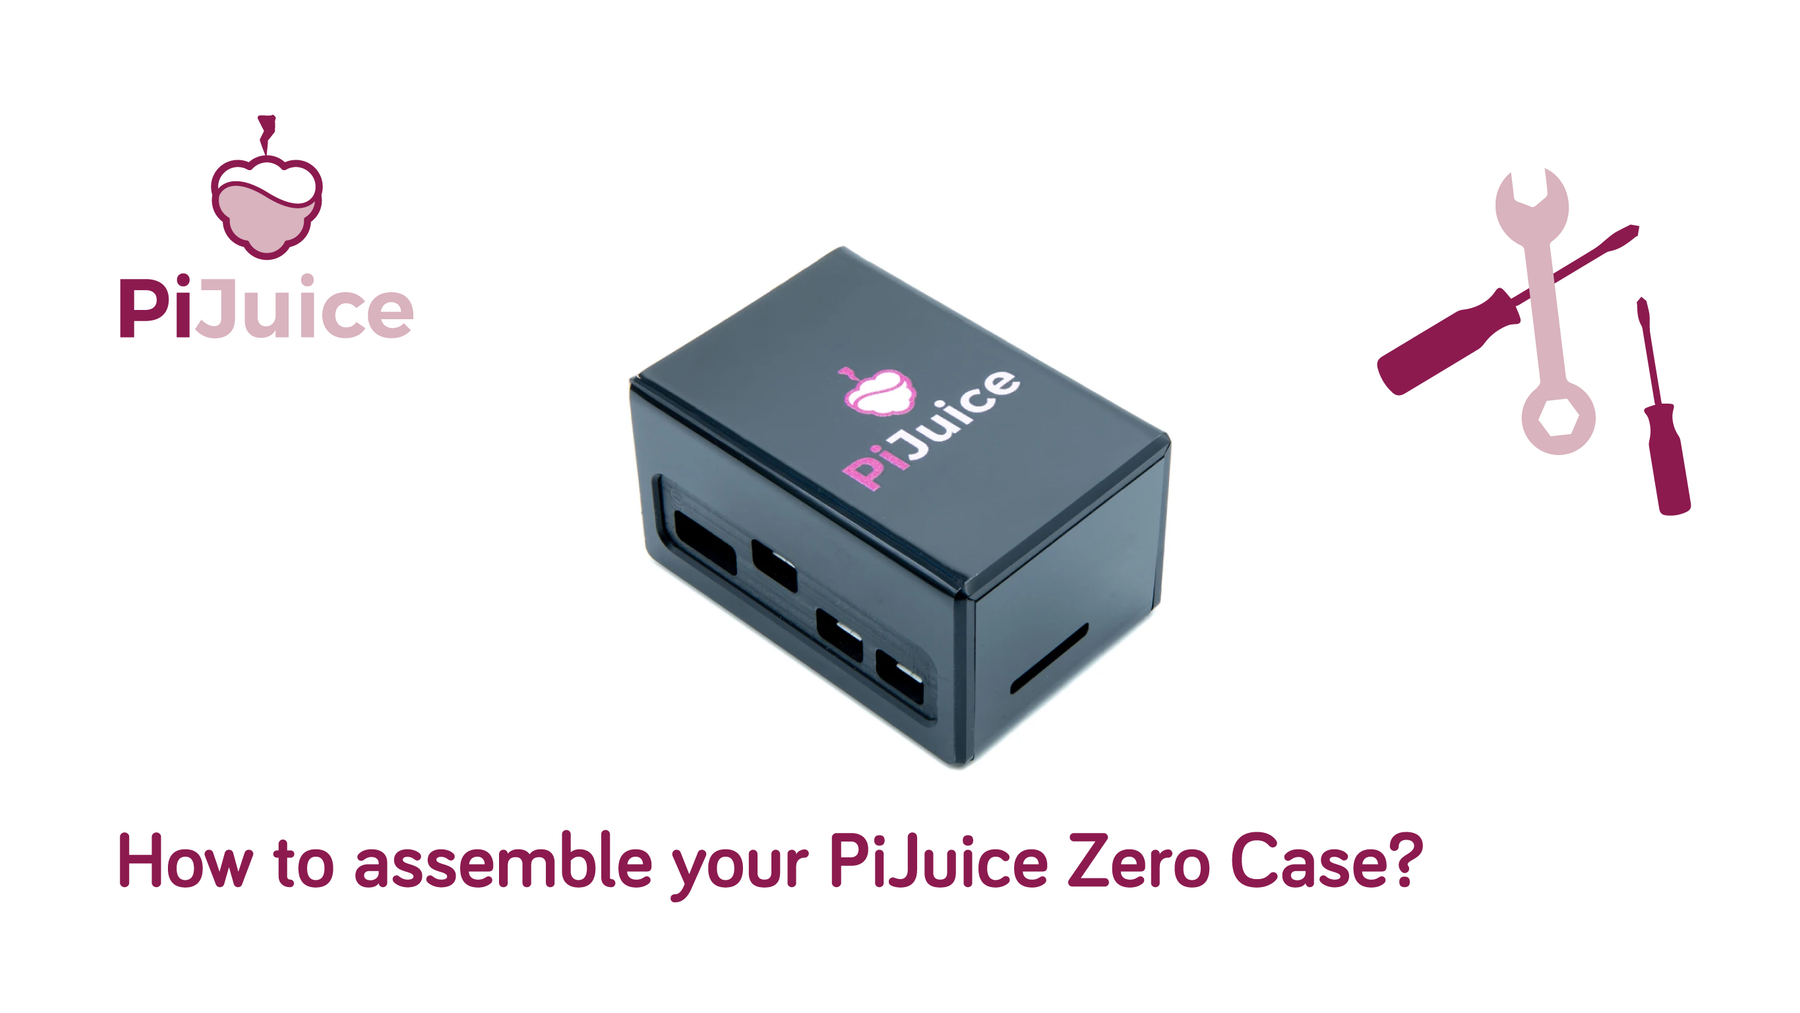 How to assemble your PiJuice Zero Case